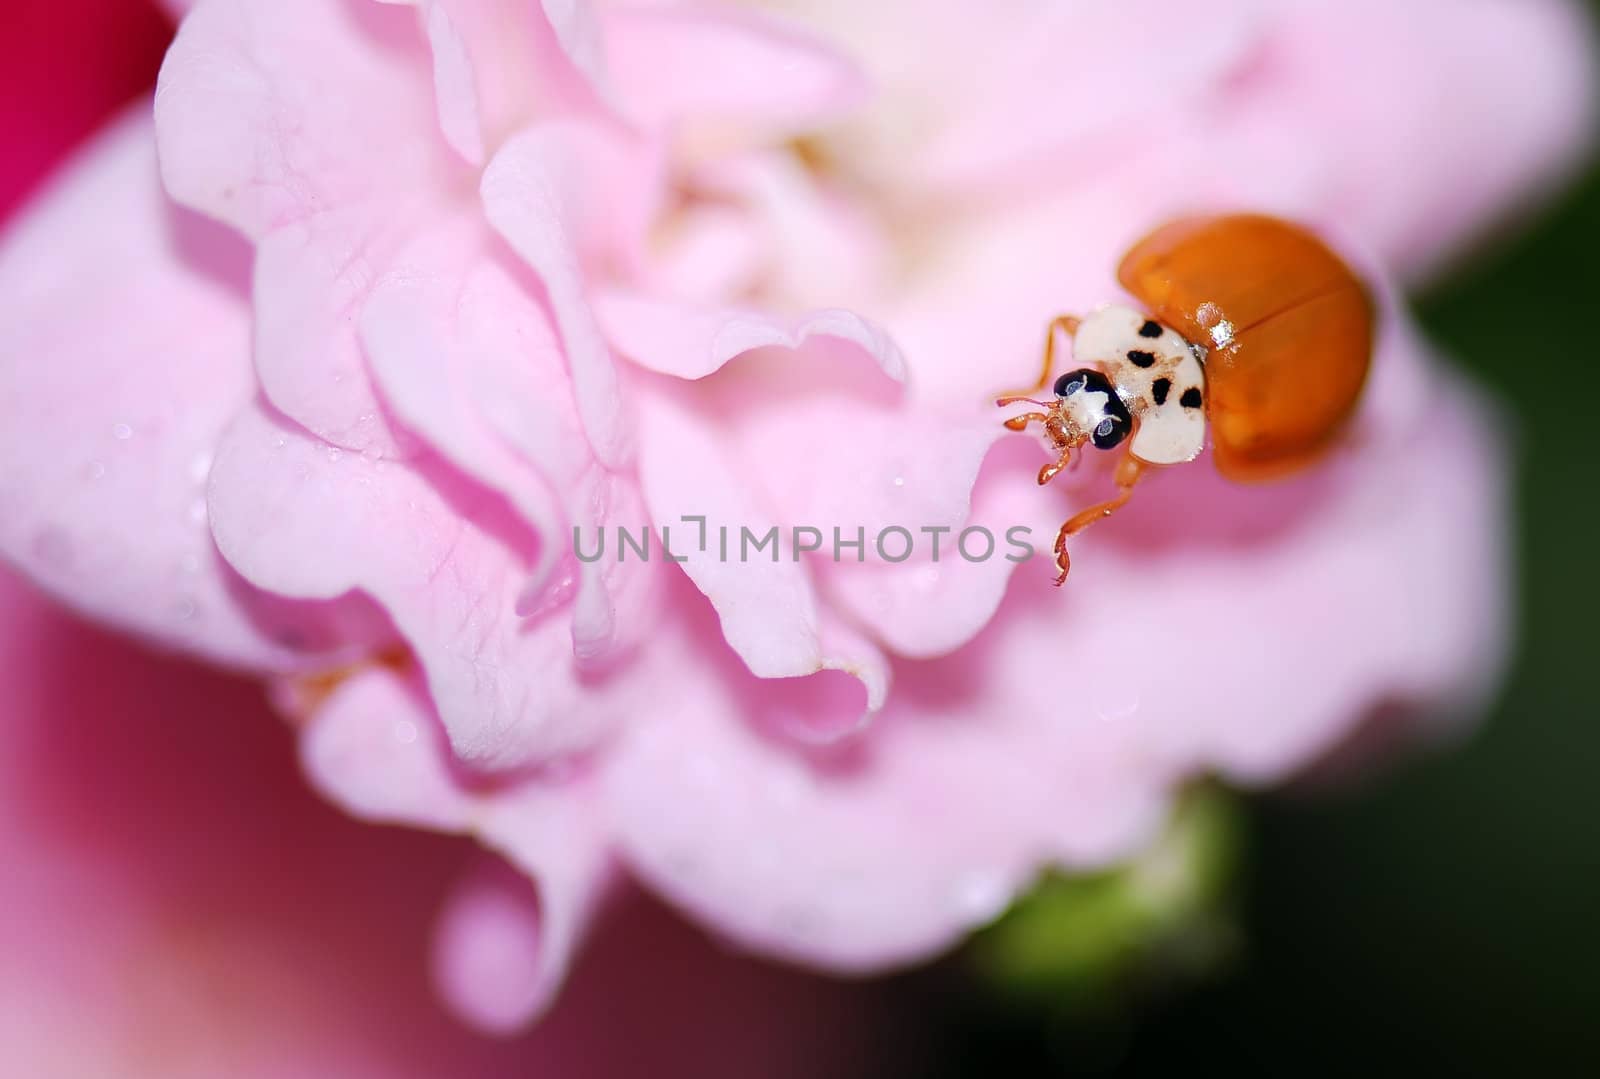 Ladybird by xfdly5